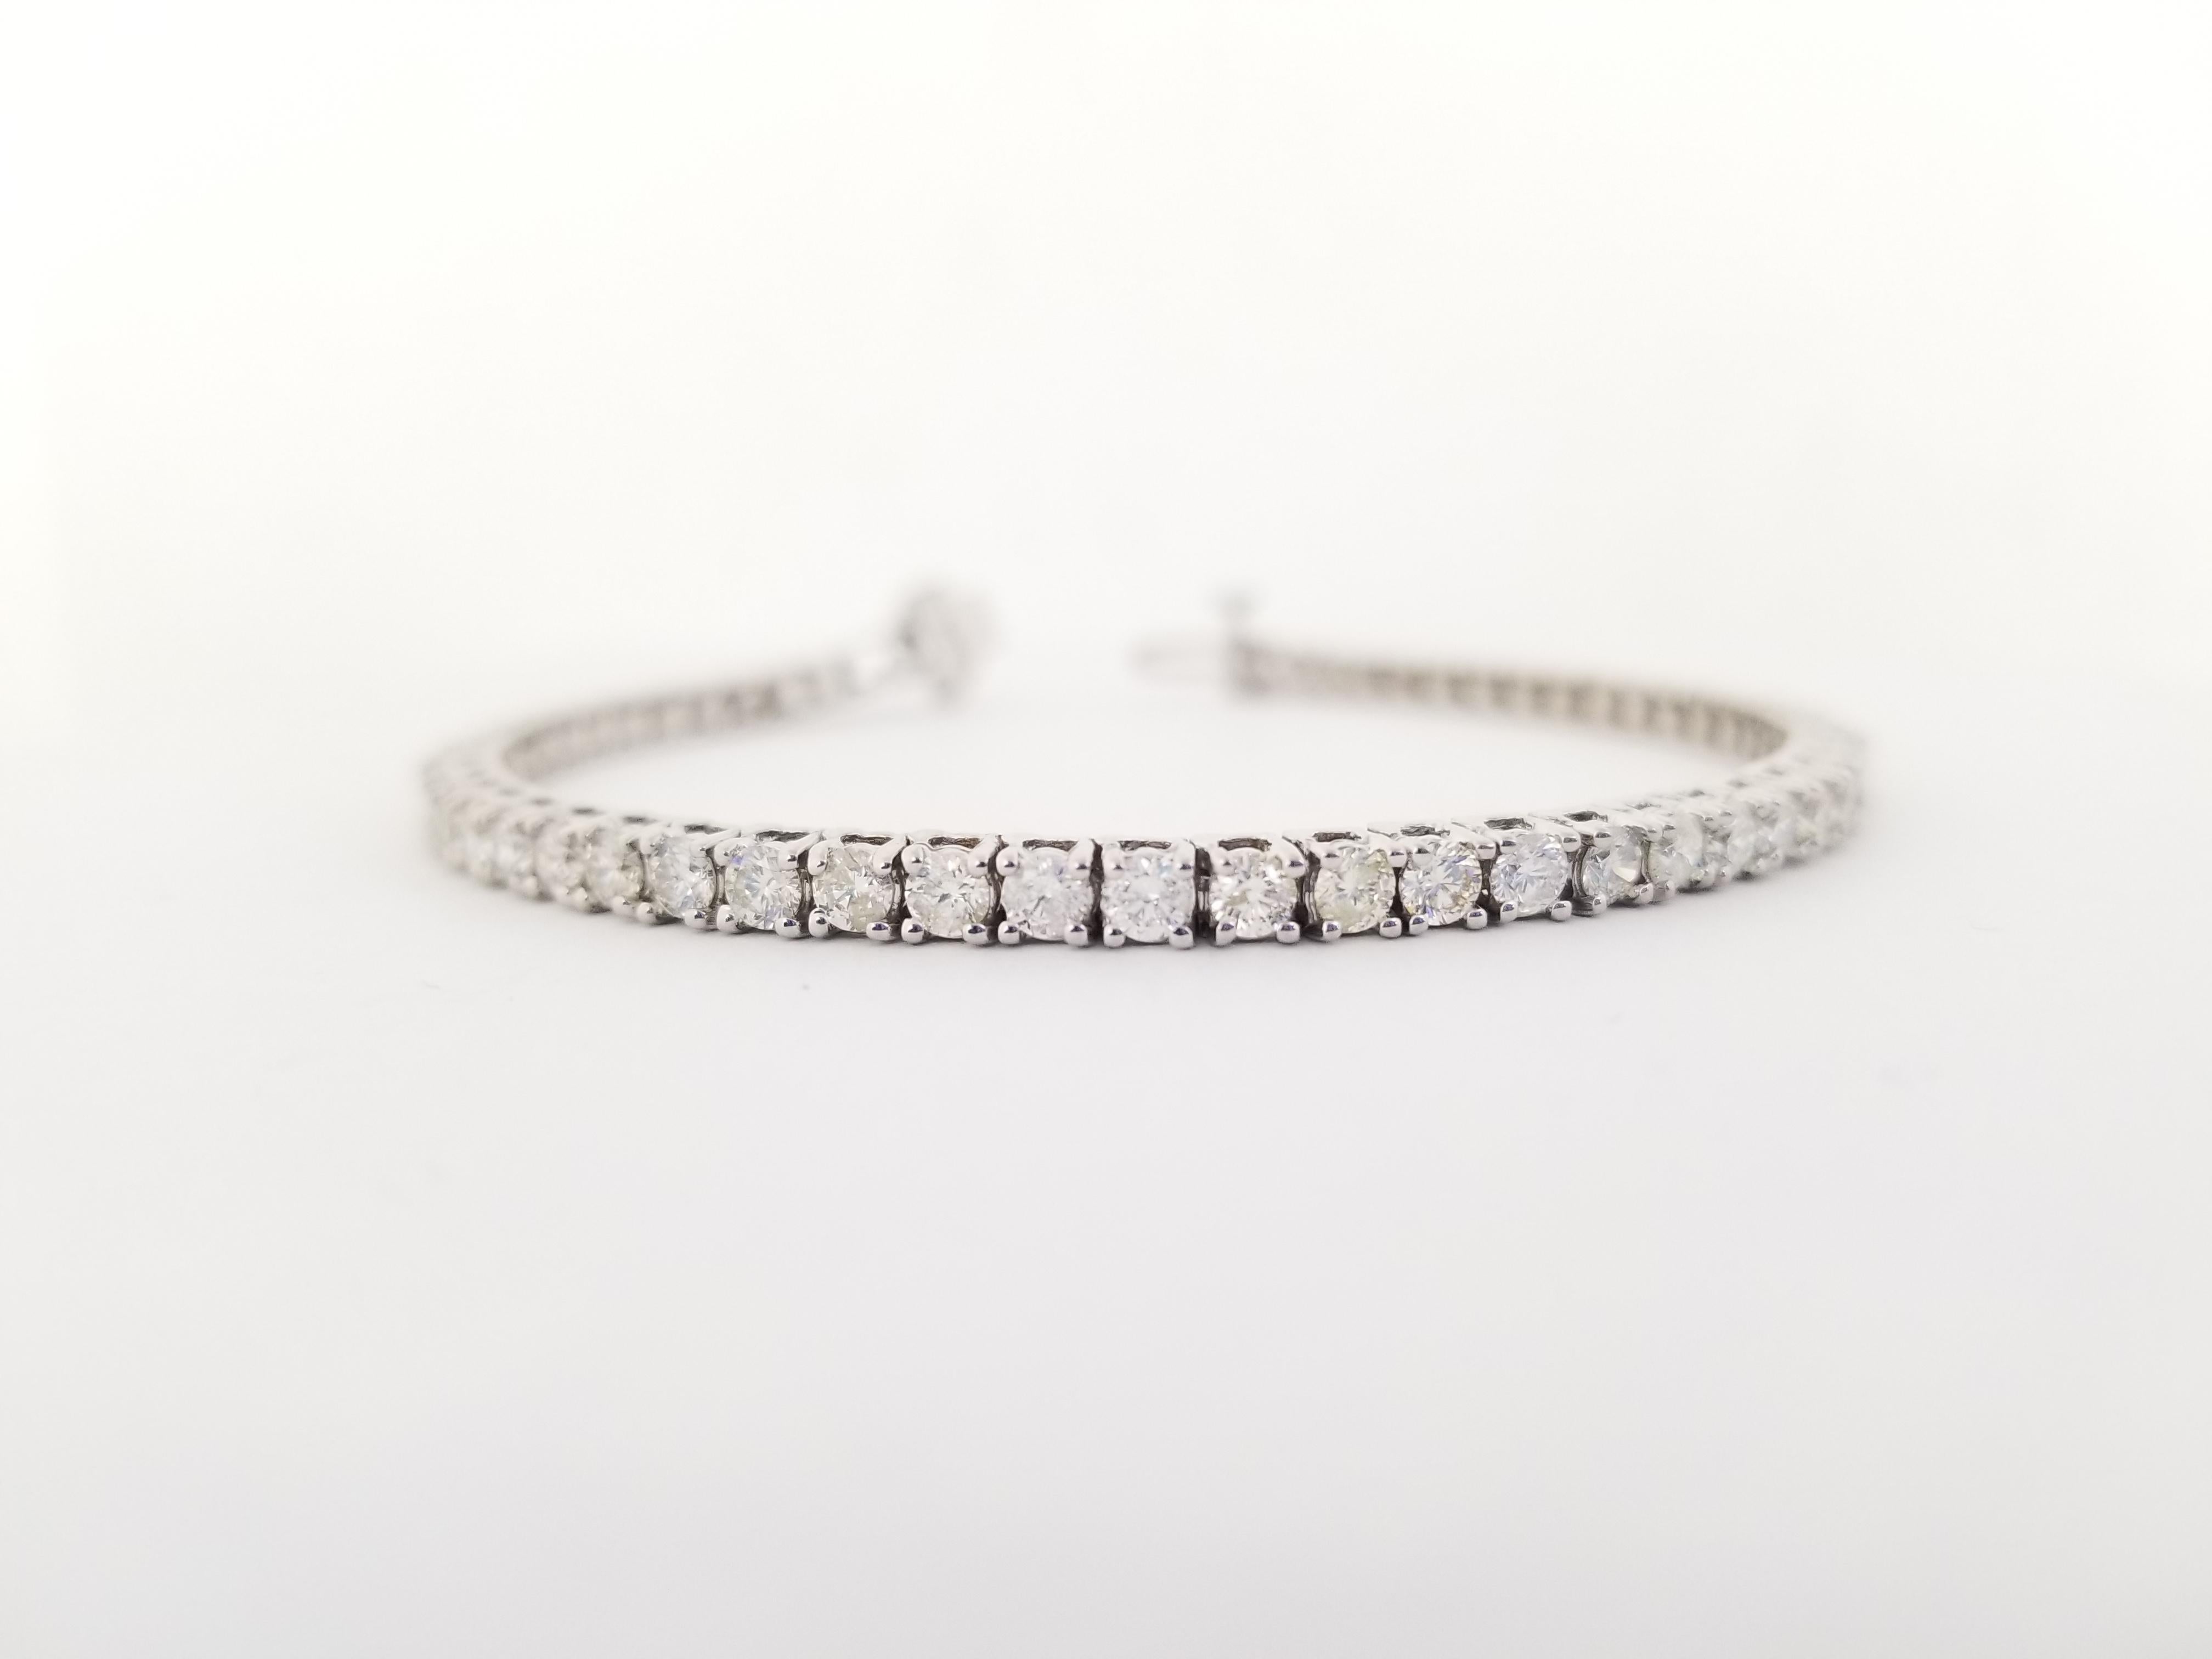 Brilliant and beautiful, set on 14K white gold. each stone is set in a classic four-prong style for maximum light brilliance. Bright and Shiny, Bold and Beautiful.

14 Karat White Gold
Natural Diamond 4.80 cwt.
Average Color I, Clarity SI 
7 inch